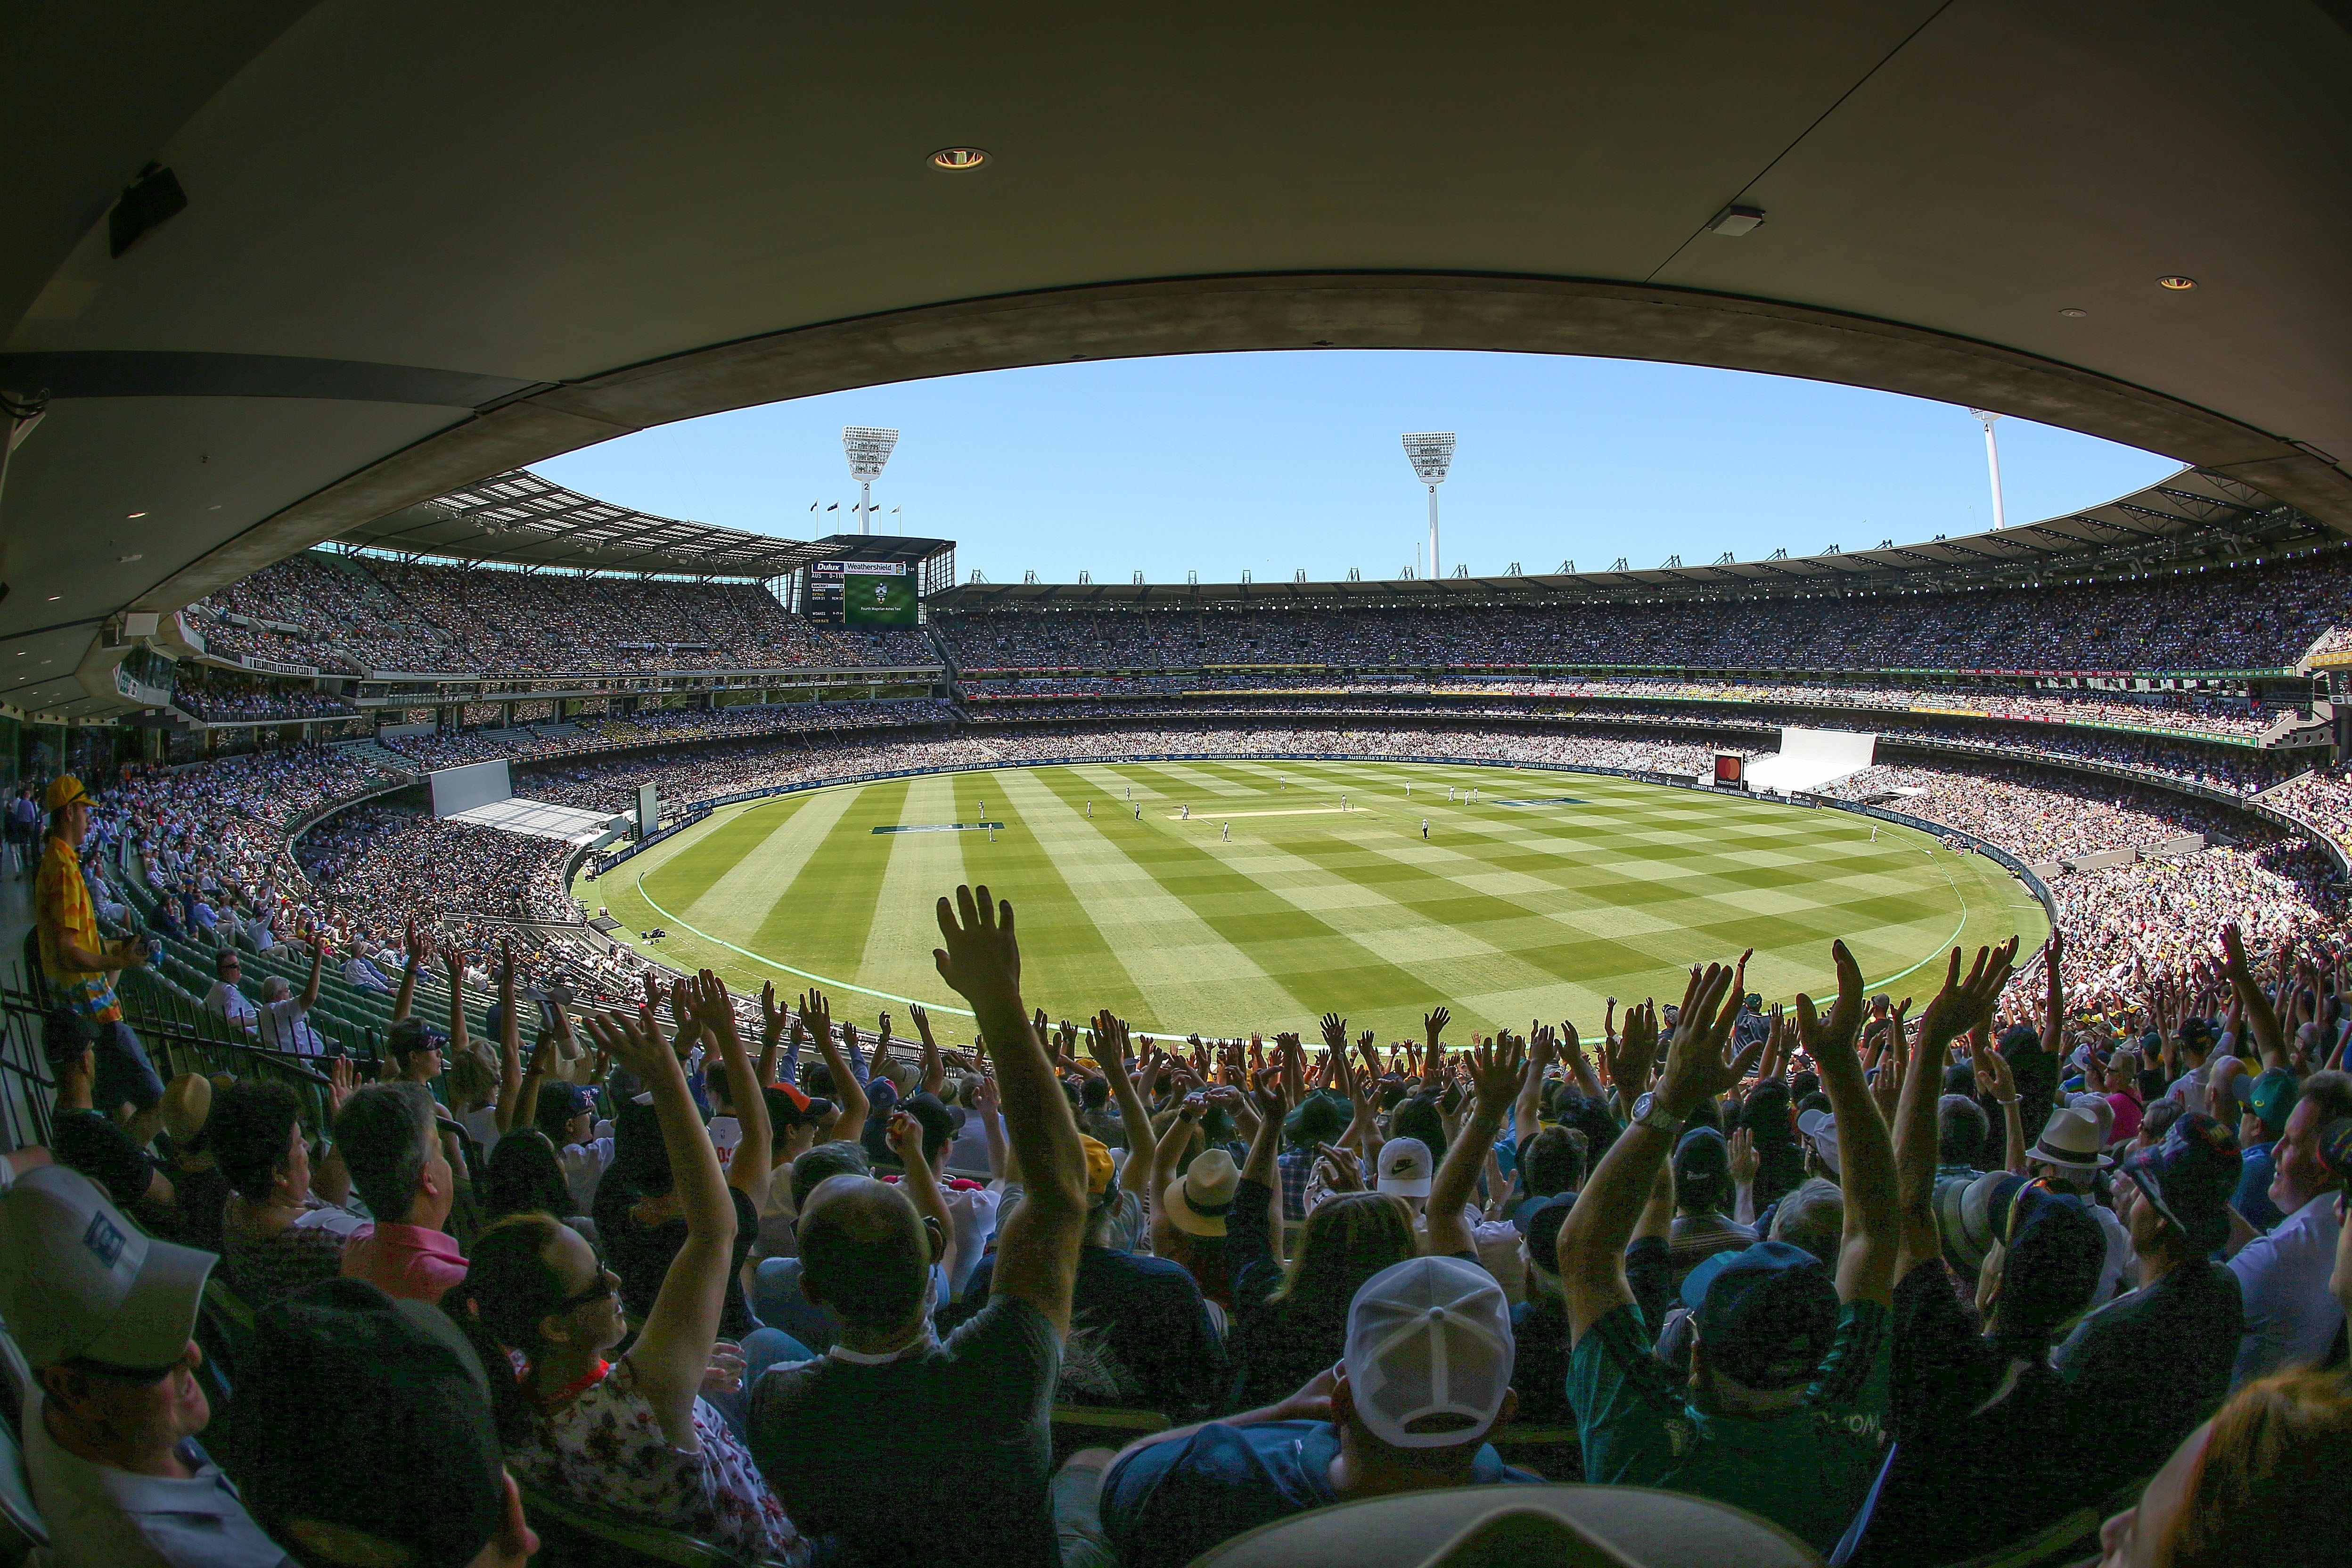 A full crowd at the Boxing Day Test at Melbourne Cricket Ground in 2017